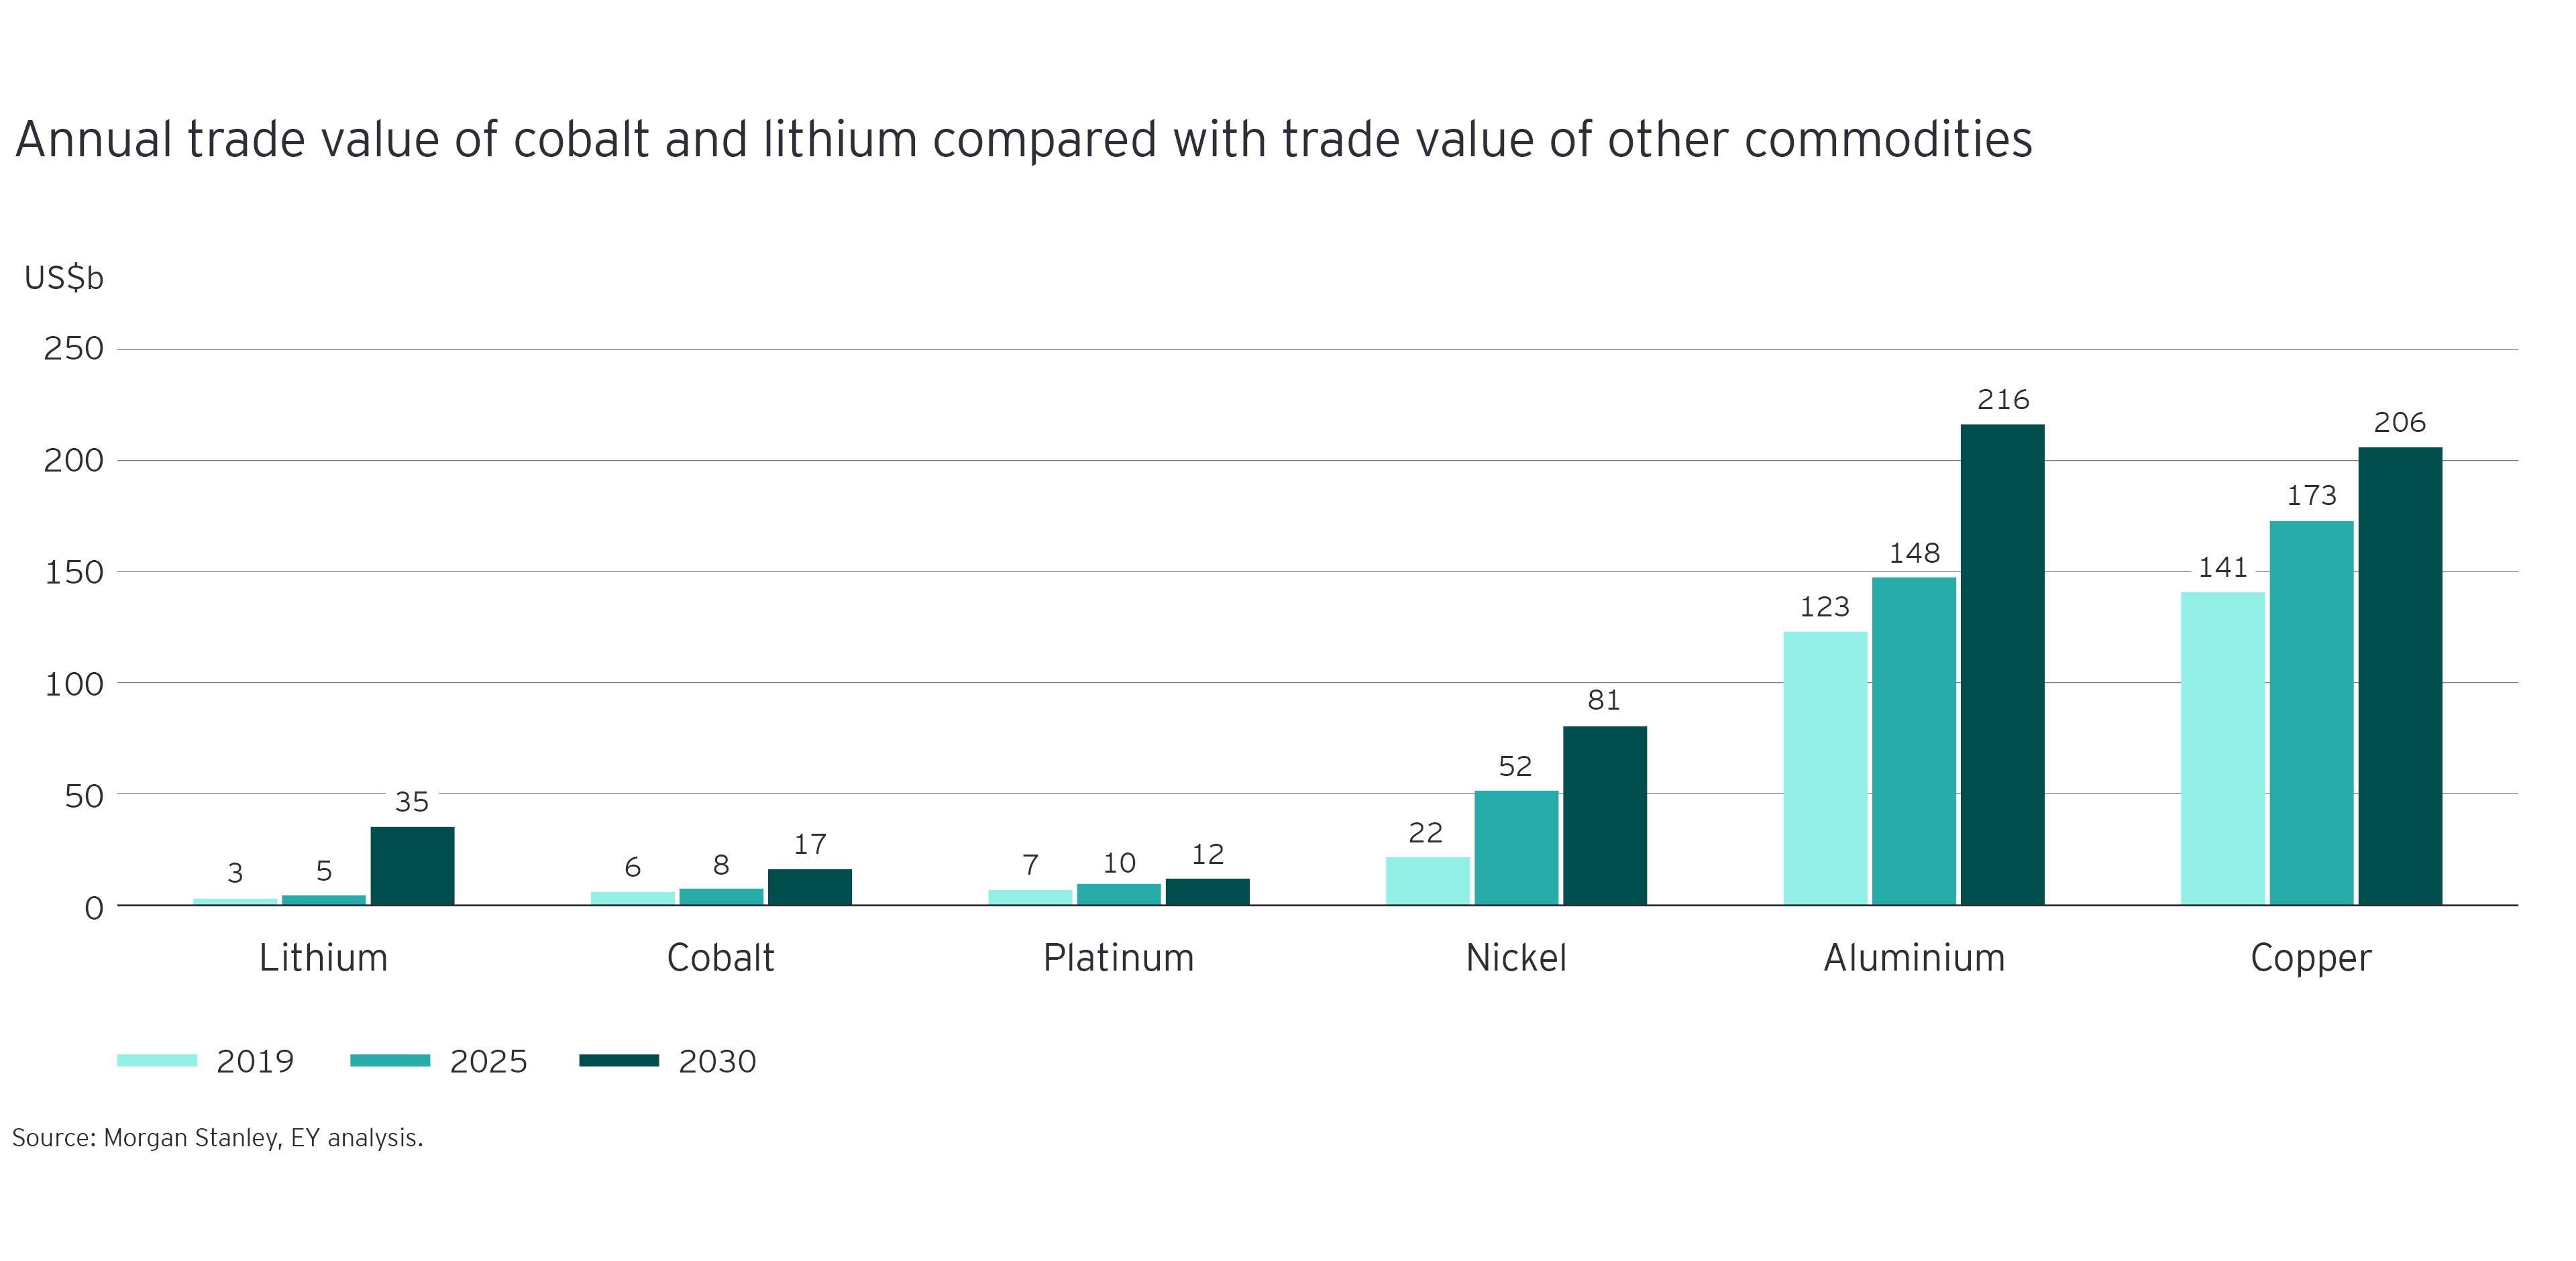 Annual trade value of minerals